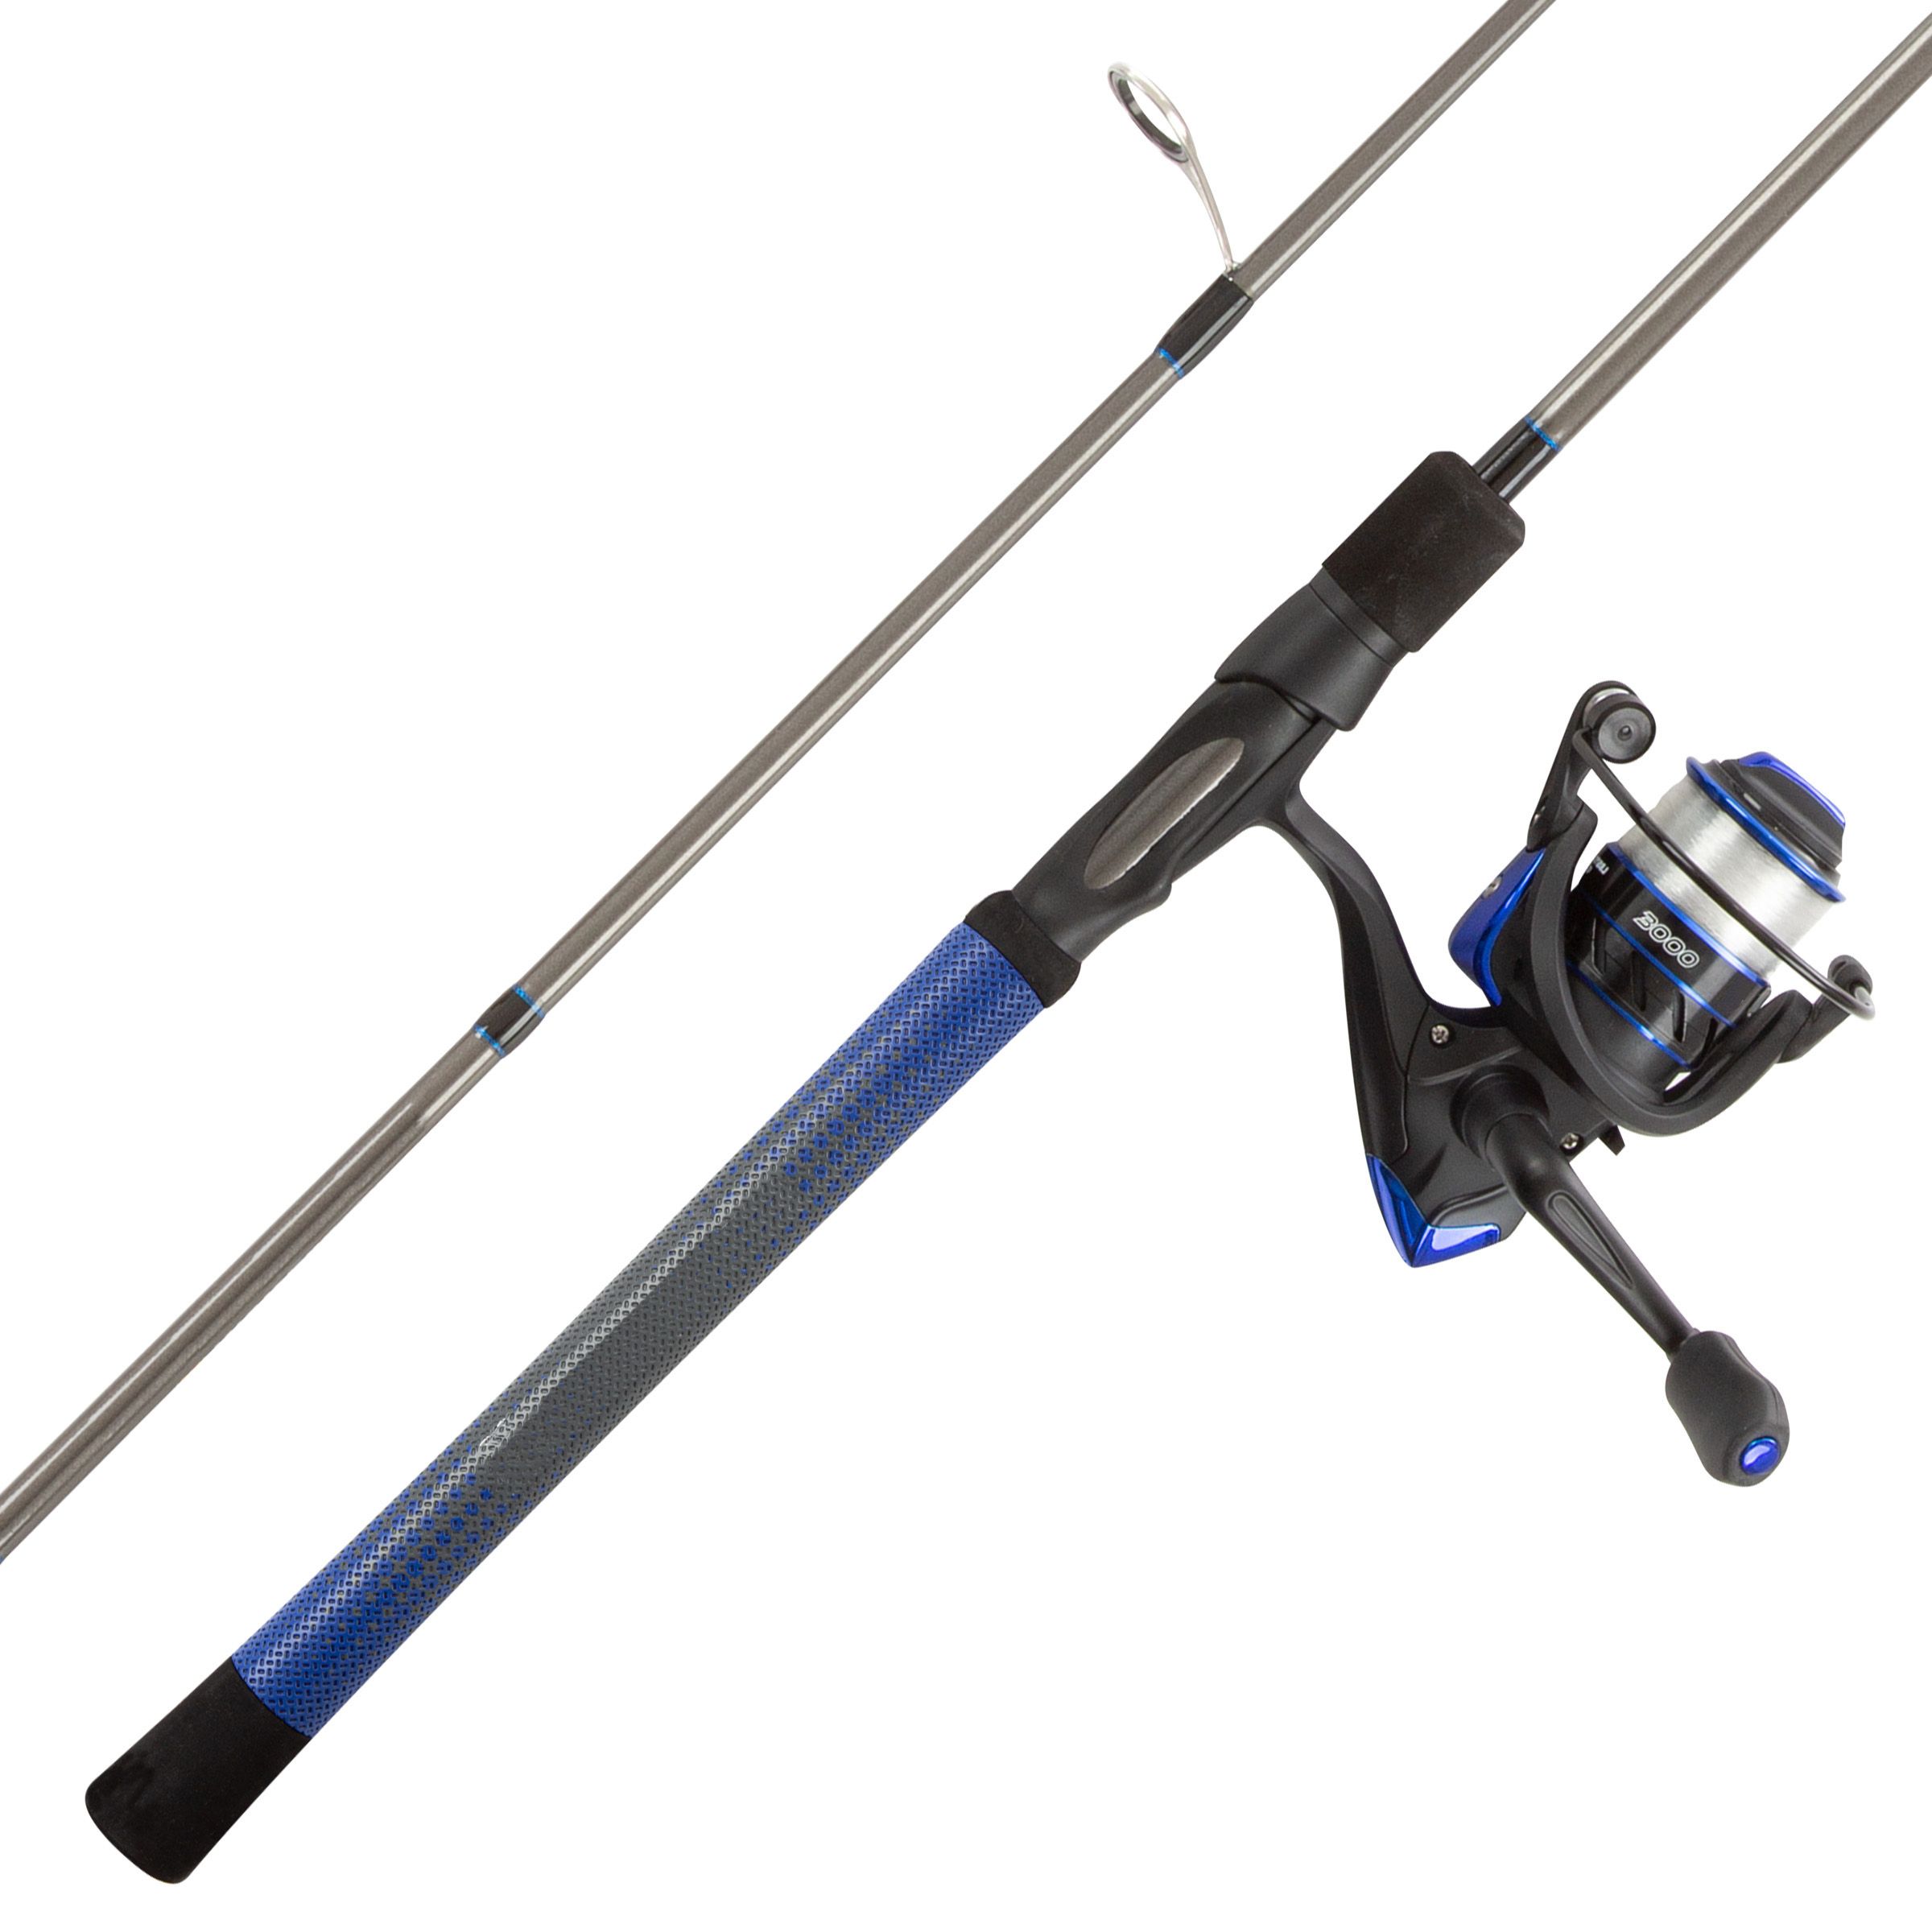 Fingerhut - Leisure Sports RH Carbon Rod and Spinning Reel Fishing Combo -  Blue